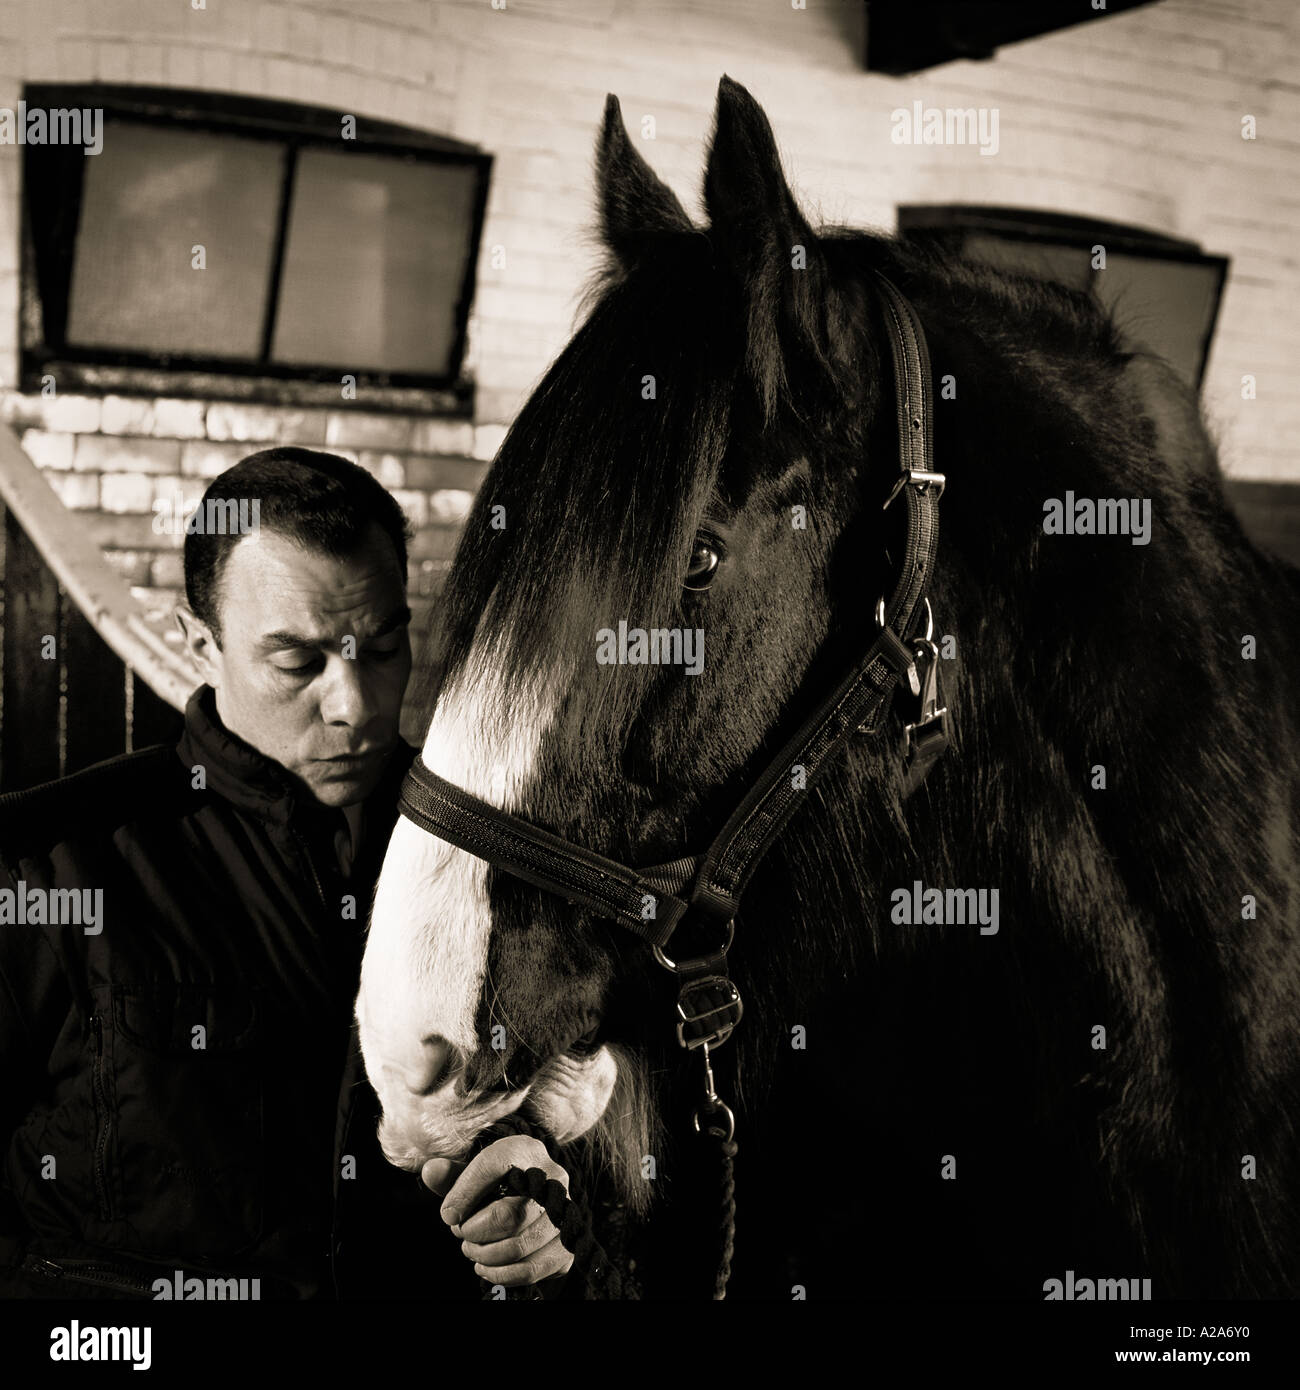 a groom at young's brewery, wandsworth, with horse Stock Photo